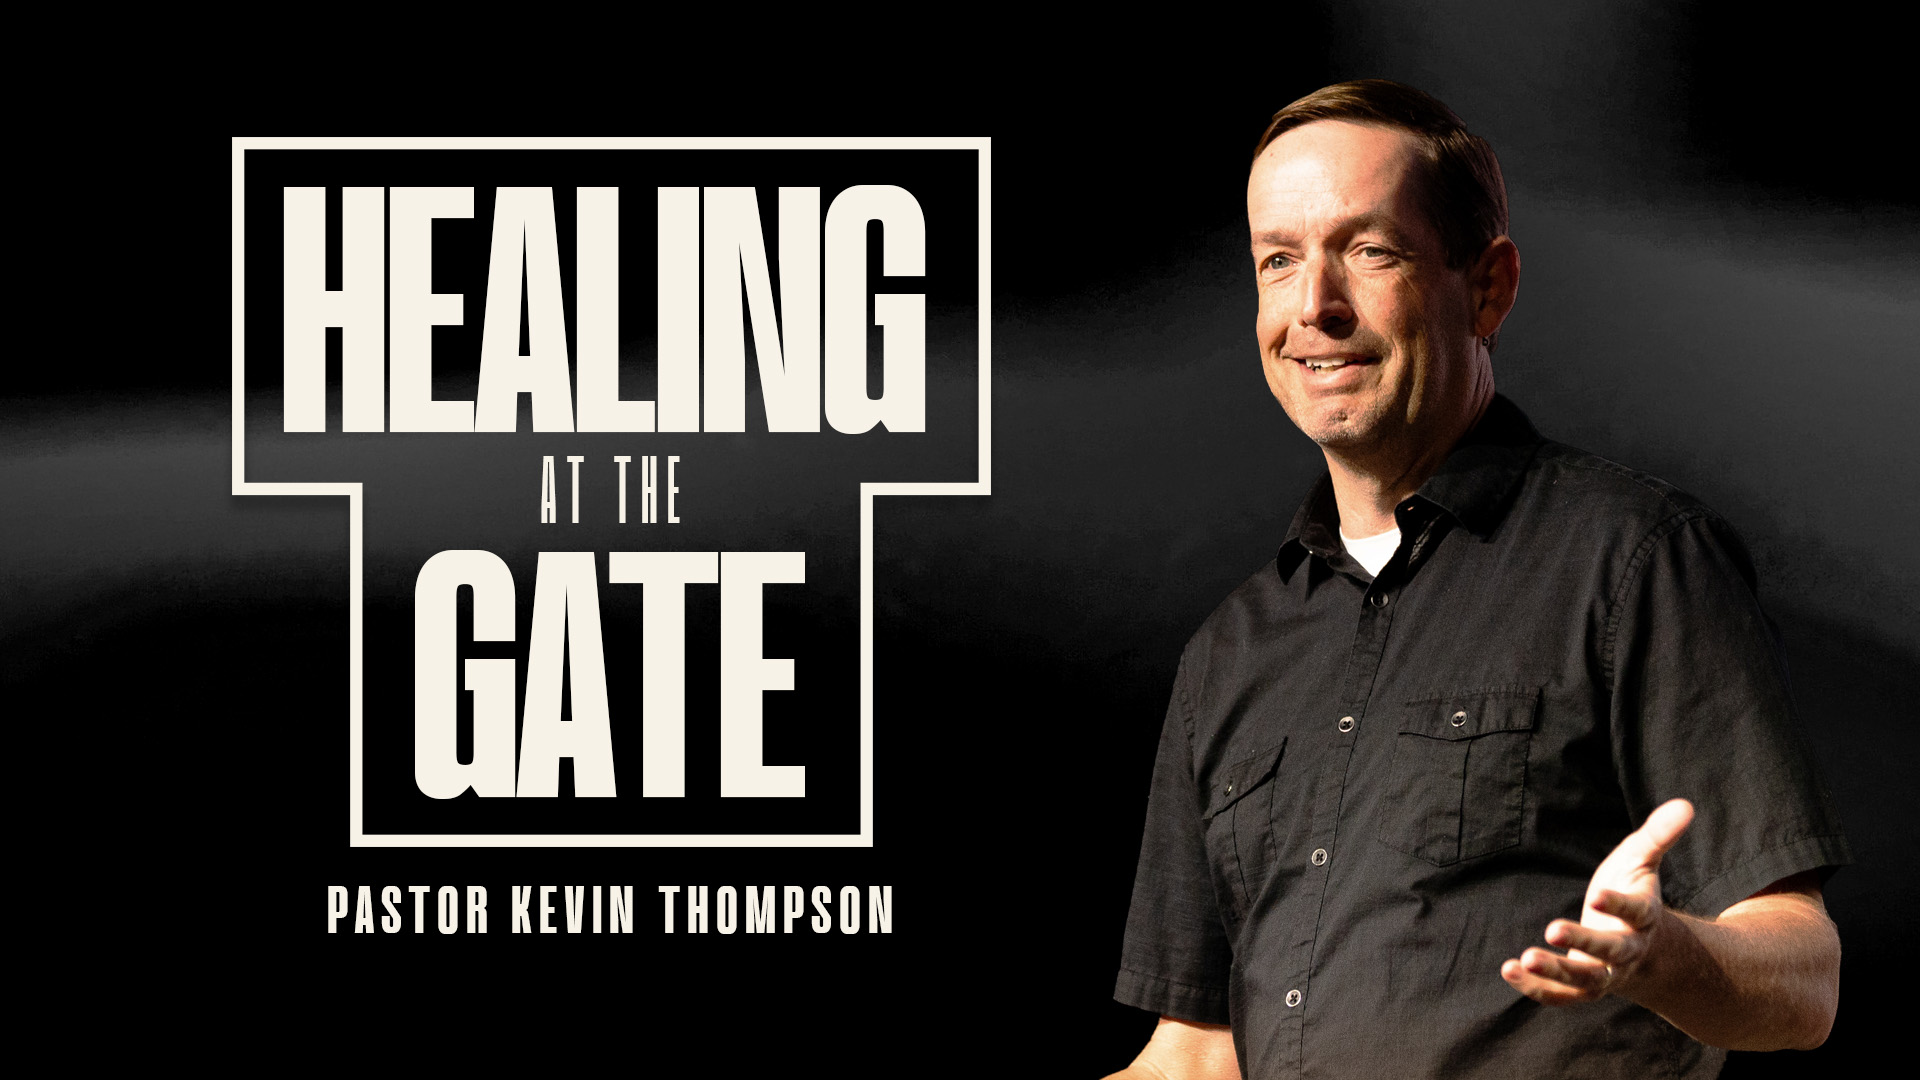 Healing at the Gate